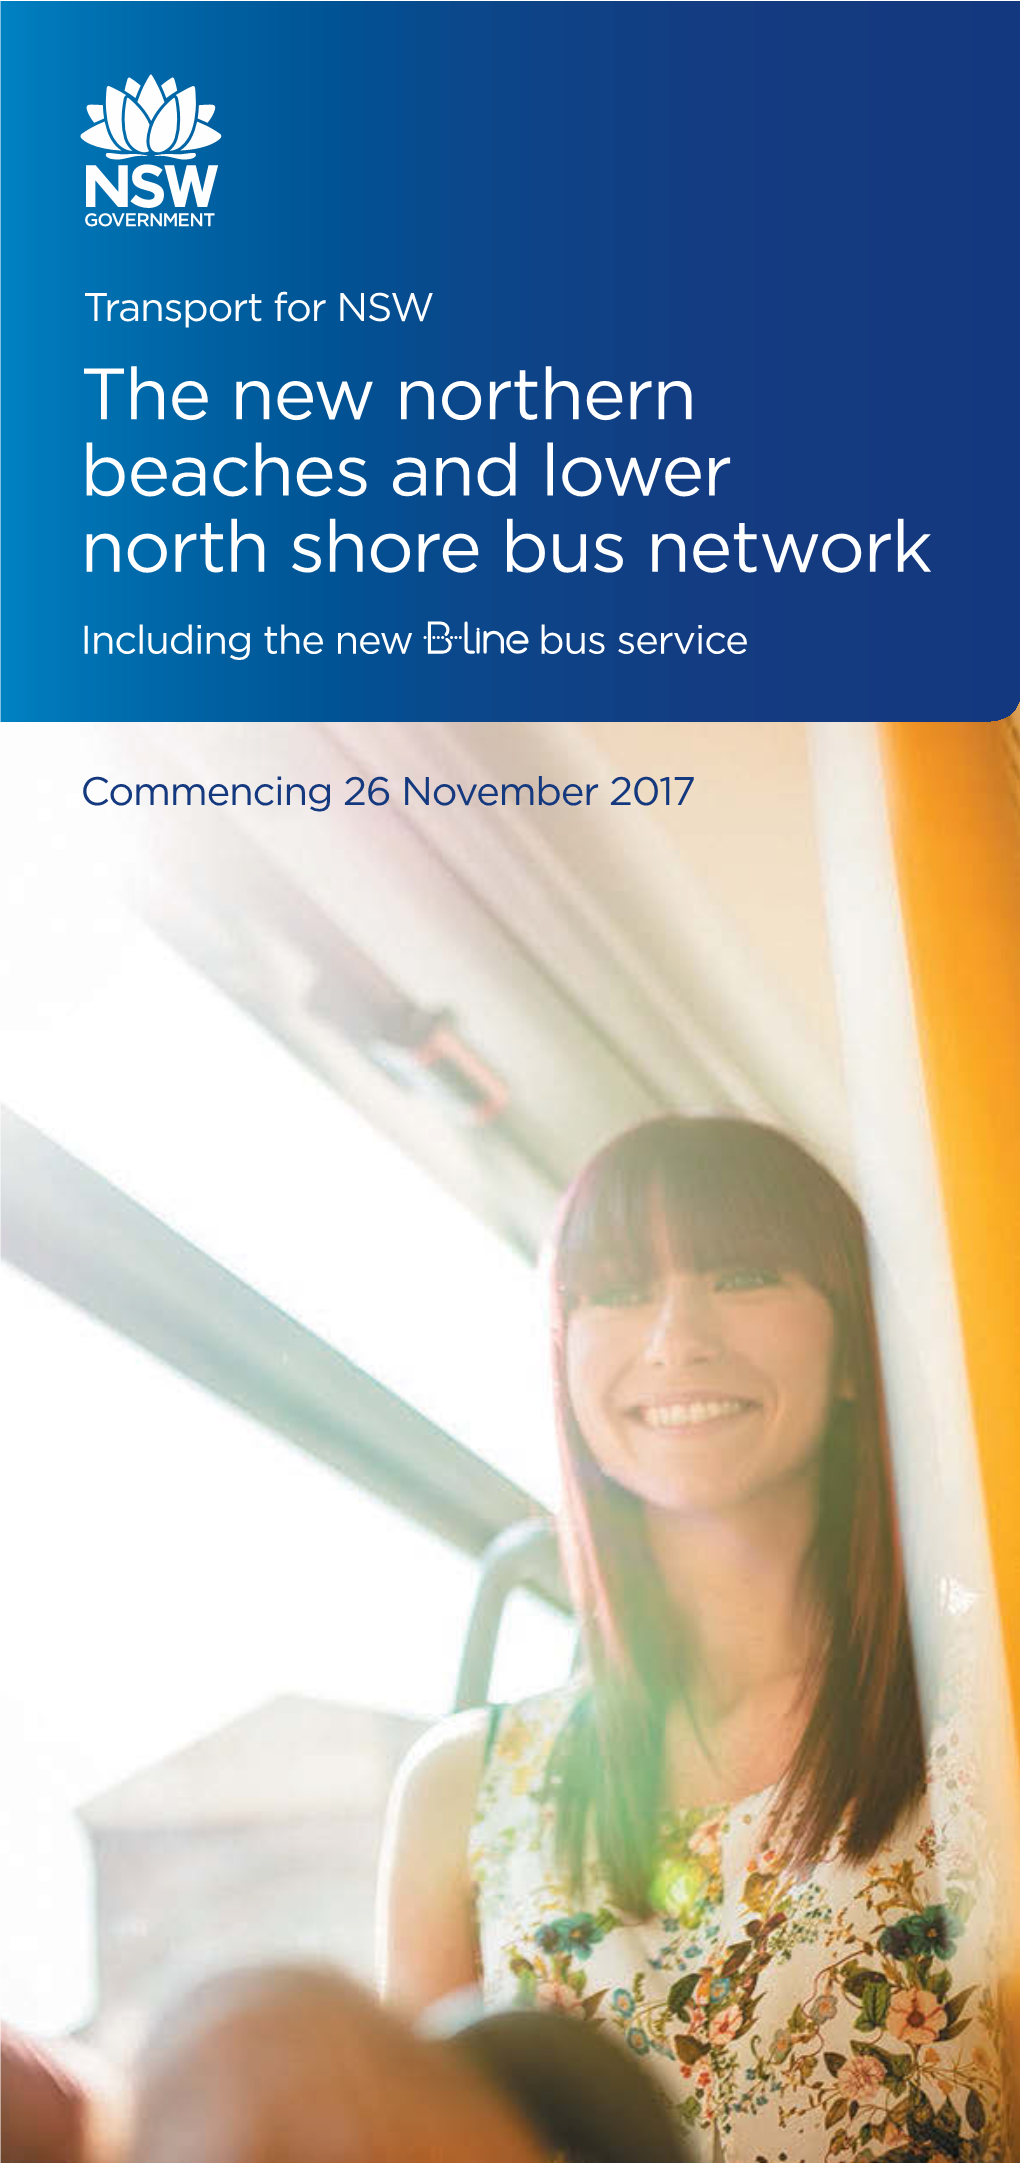 The New Northern Beaches and Lower North Shore Bus Network Including the New Bus Service